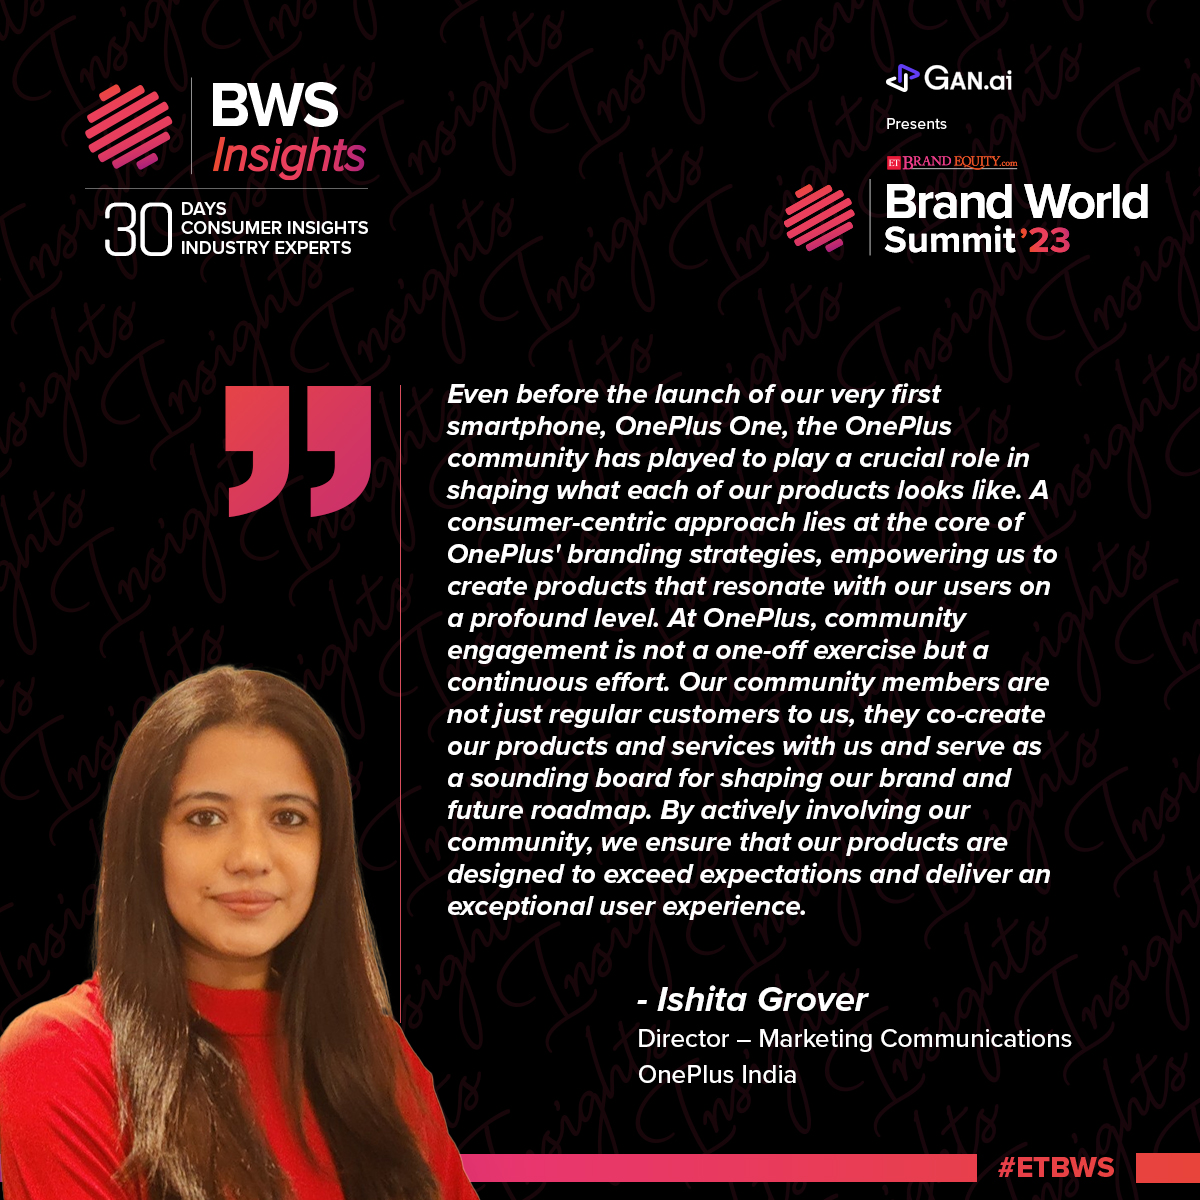 We're excited to present a consumer insight shared by @ishitag, Director – Marketing Communications, @OnePlus_IN.

Link: bit.ly/3P4D0jw

#ETBWS #BrandsWorldSummit #Ads #Branding #Agency #TechInnovation #Media #Advertising #DigitalMarketing #learningopportunities